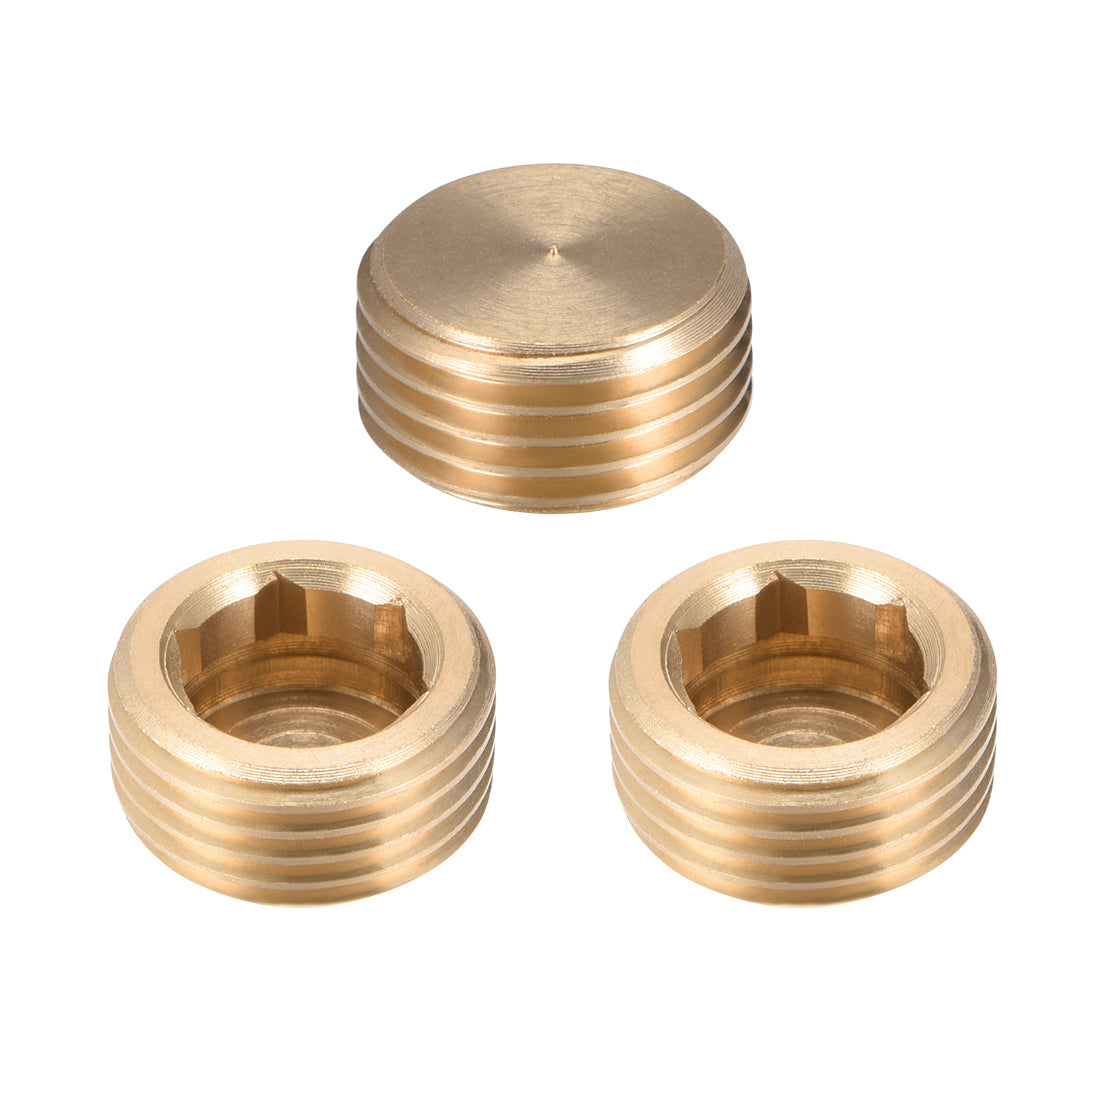 Uxcell Uxcell Brass Pipe Fitting, Hex Counter Sunk Plug, Connector Coupling , 1/4 Inch G Male Pipe Adapter 10pcs